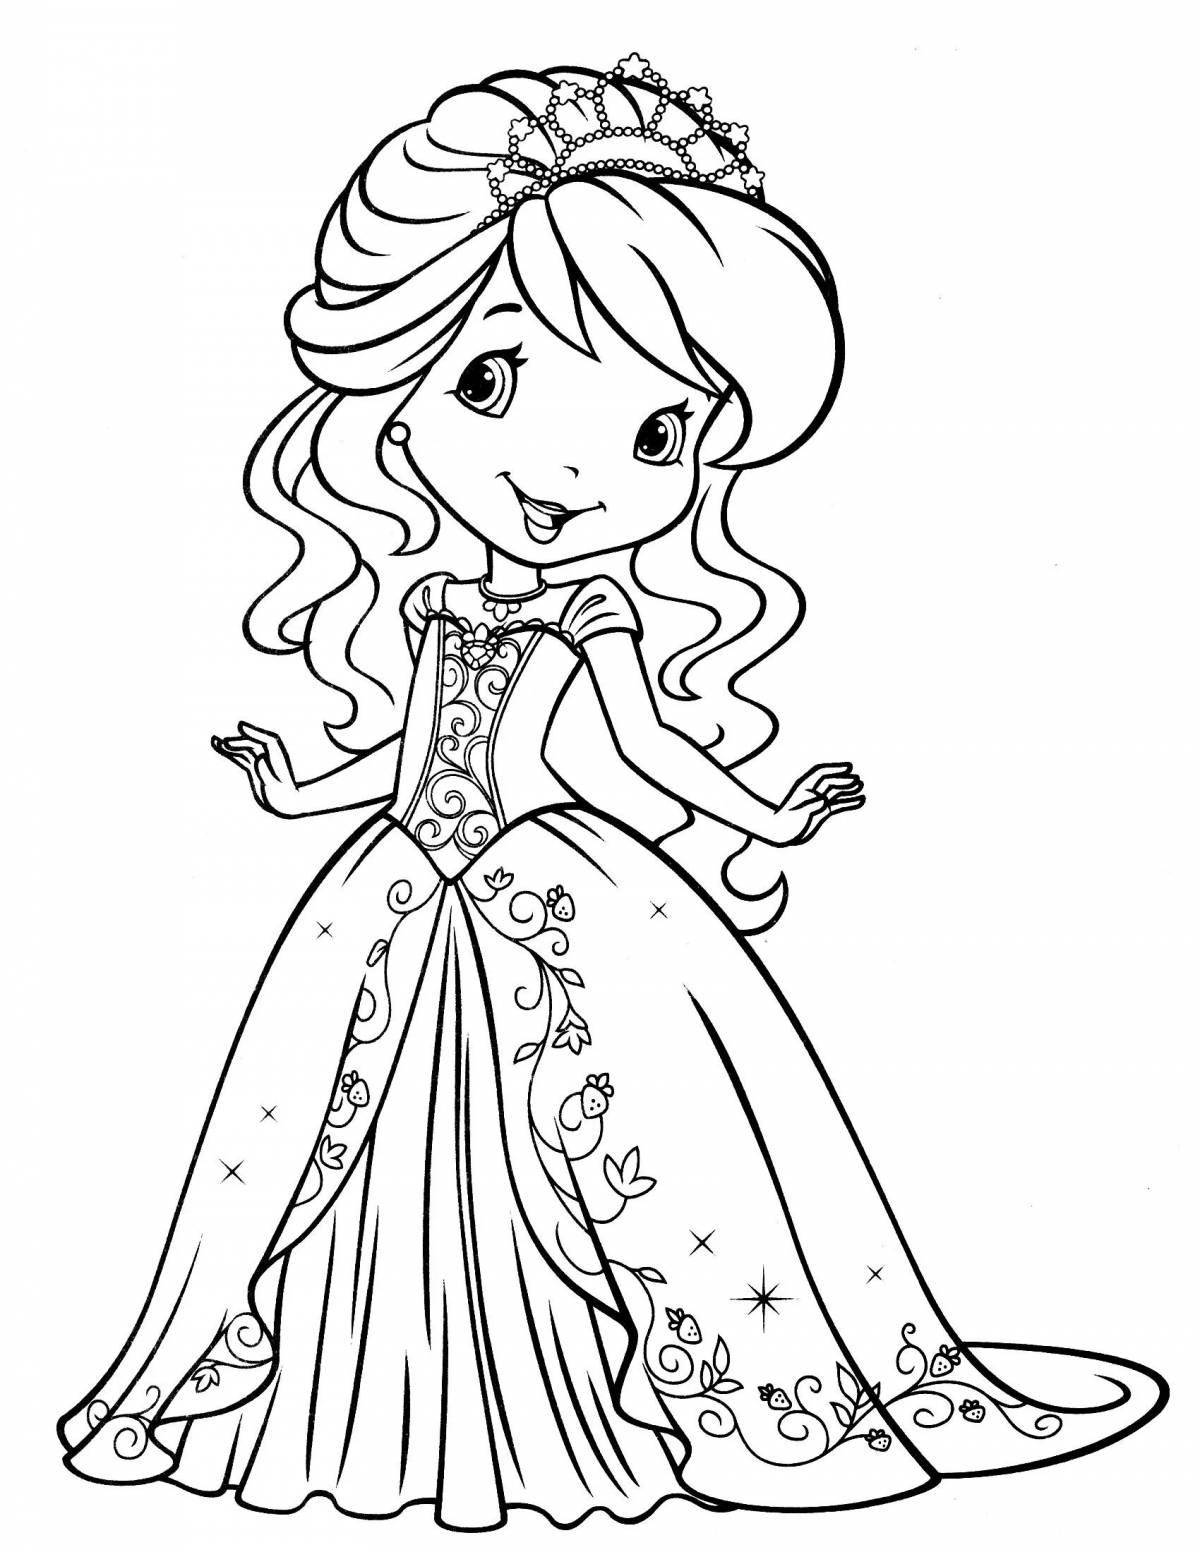 Glamorous coloring book for girls princesses 5-6 years old